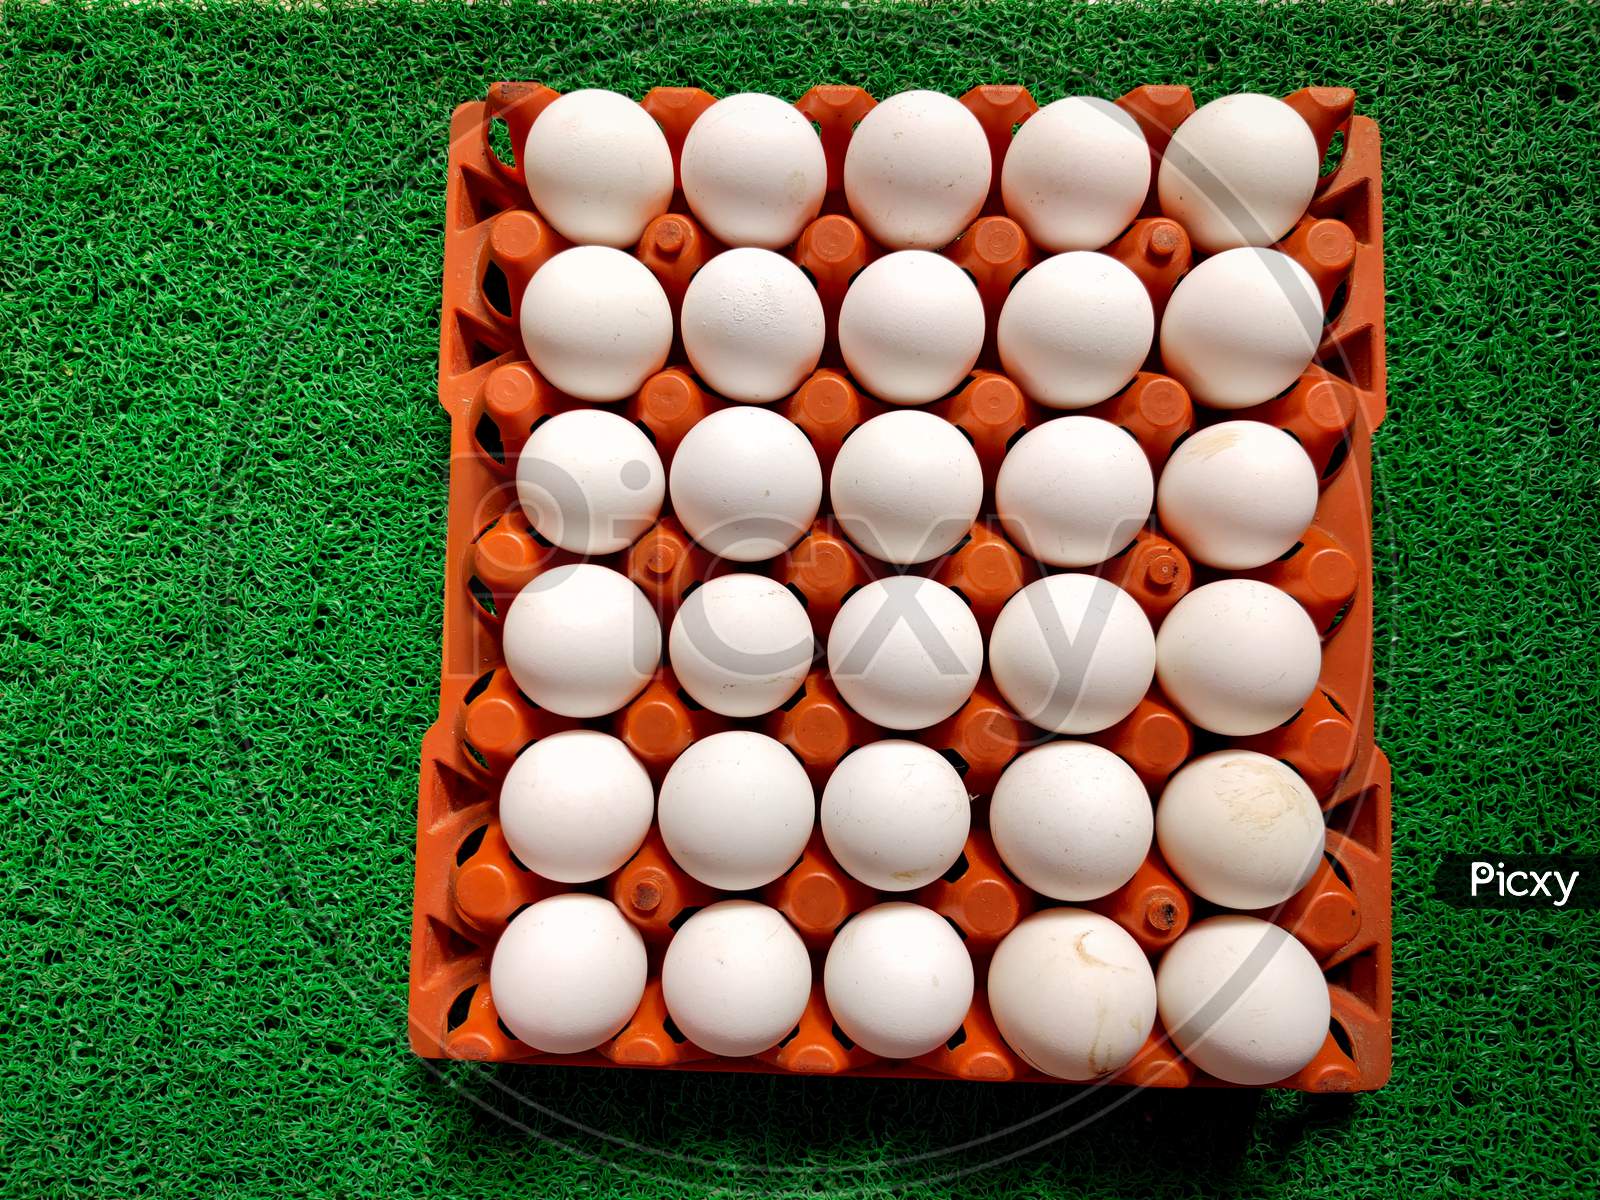 Top View Of 30 Chicken White Eggs Kept In Plastic Tray. Isolated On Green Background. Stack Of Eggs